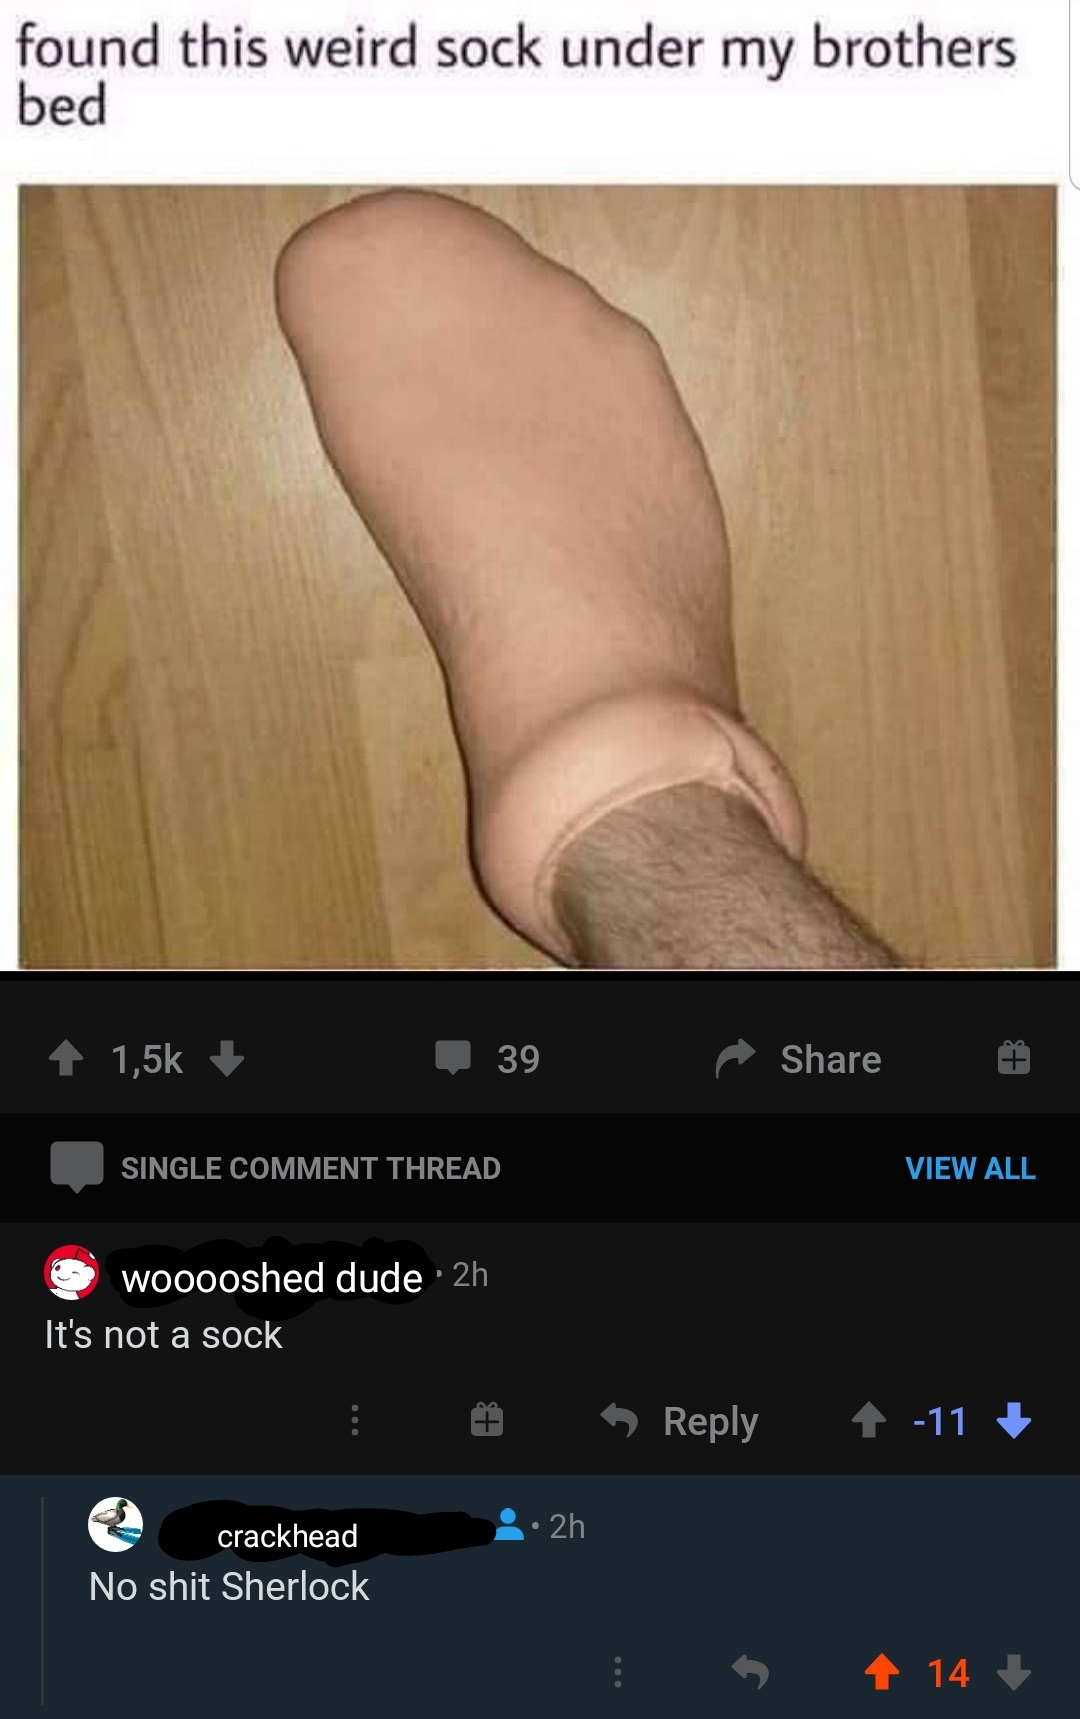 leg - found this weird sock under my brothers bed 39 Single Comment Thread View All wooooshed dude 2h It's not a sock 11 2h crackhead No shit Sherlock 4 14